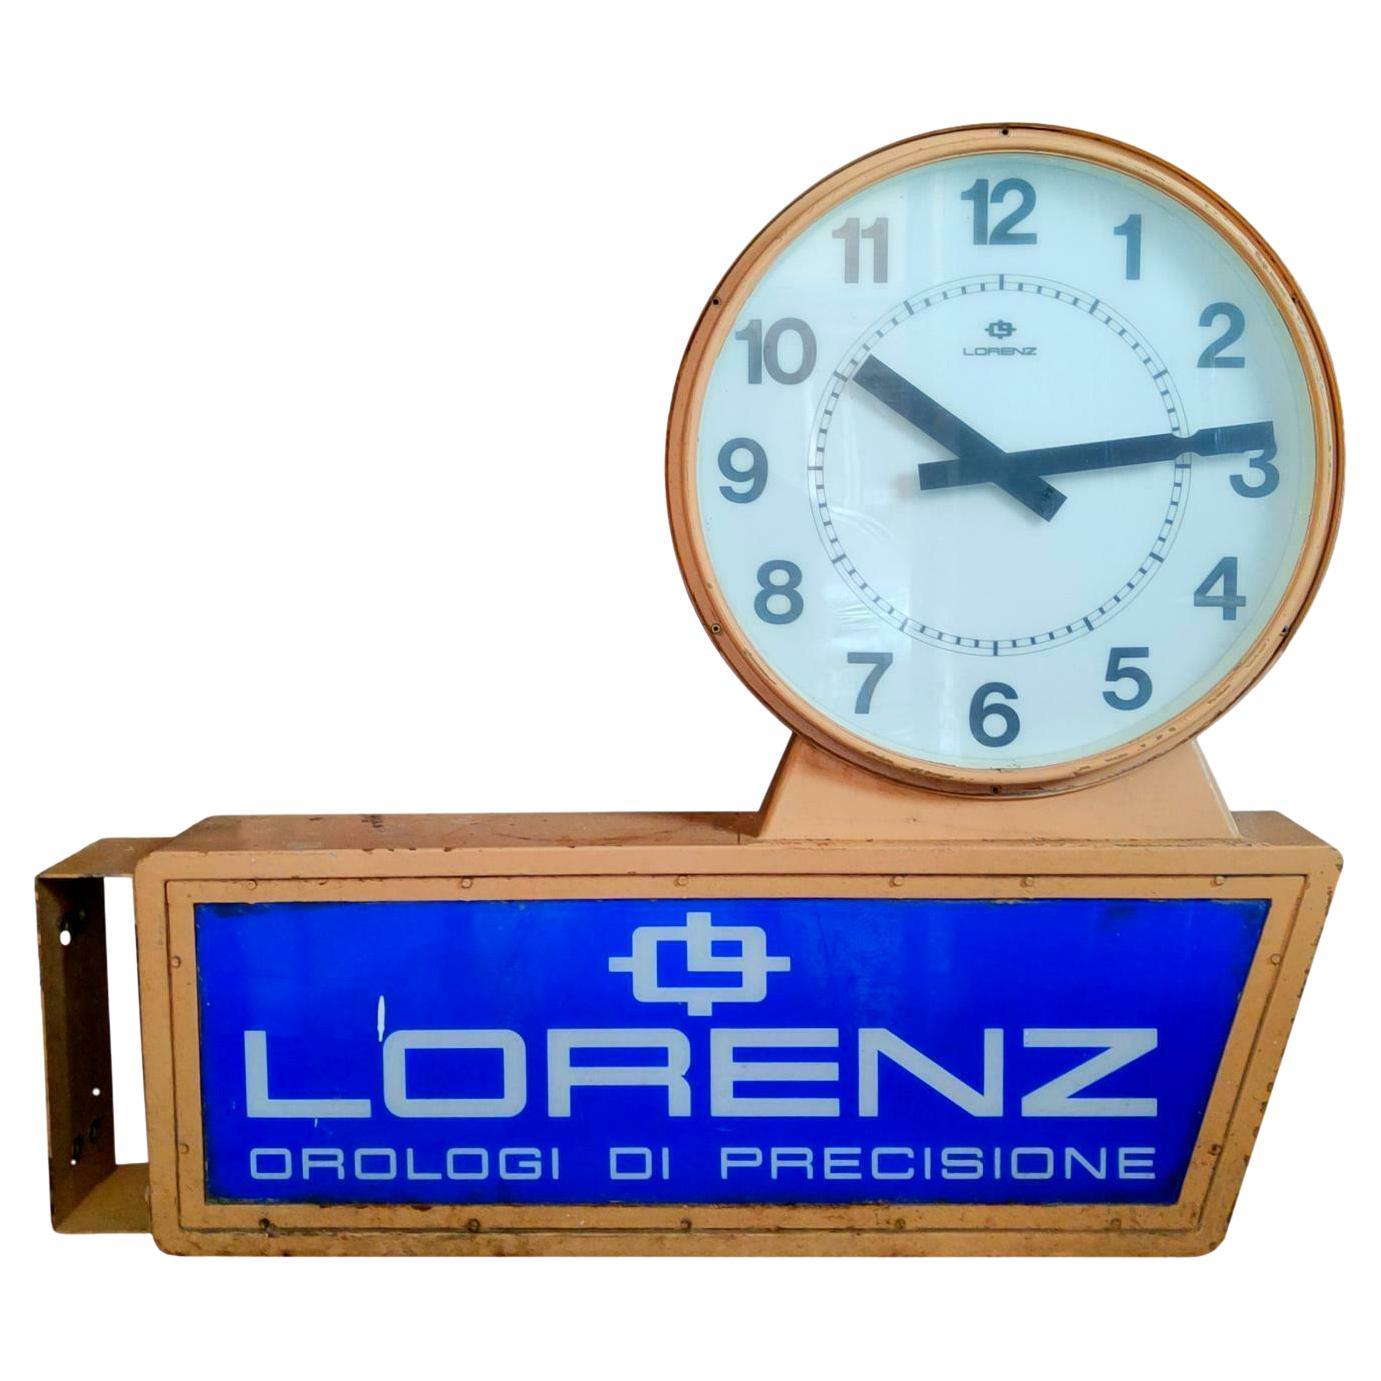 Large Double-Sided Advertising Street Clock "Lorenz" Watches, 1960s For Sale